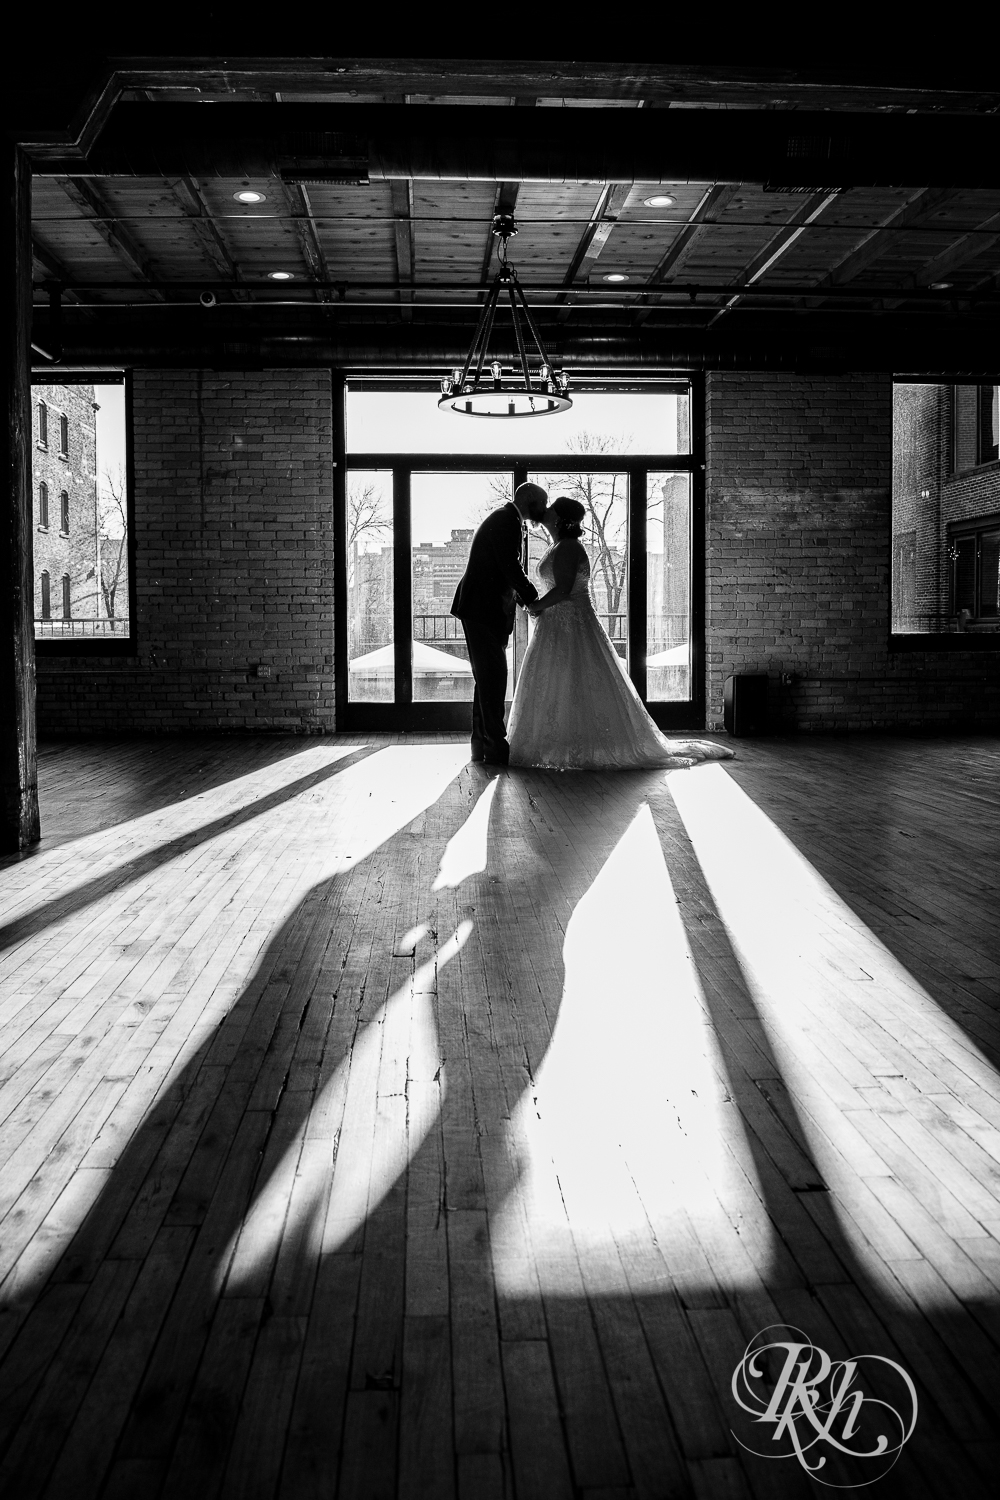 Bride and groom kiss in silhouette in Minneapolis Event Centers in Minneapolis, Minnesota.